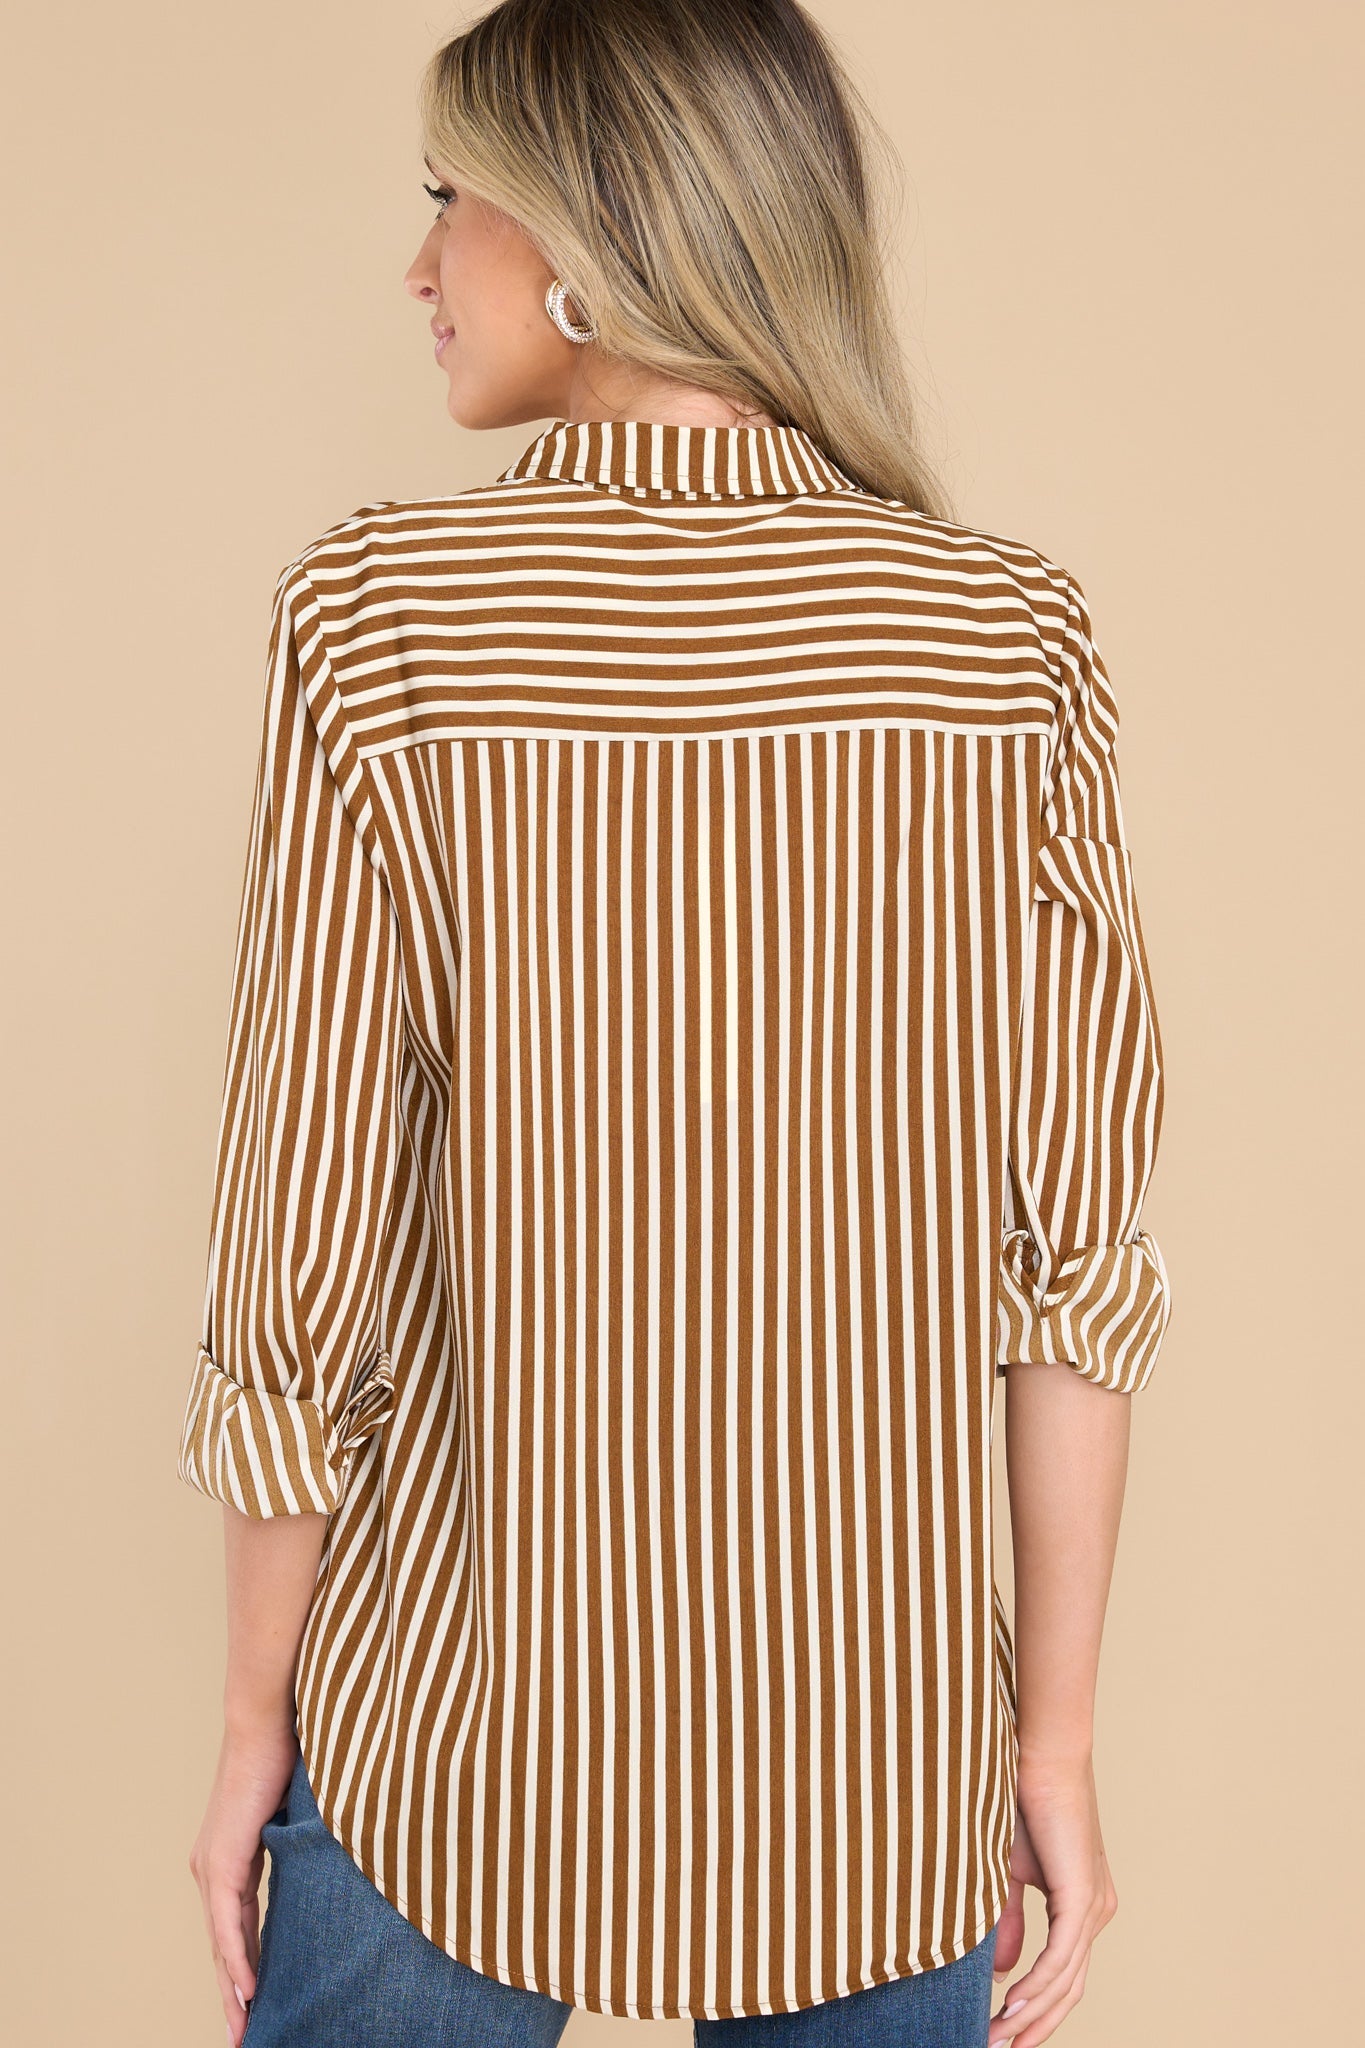 Fit And Trim Brown Striped Top - Red Dress